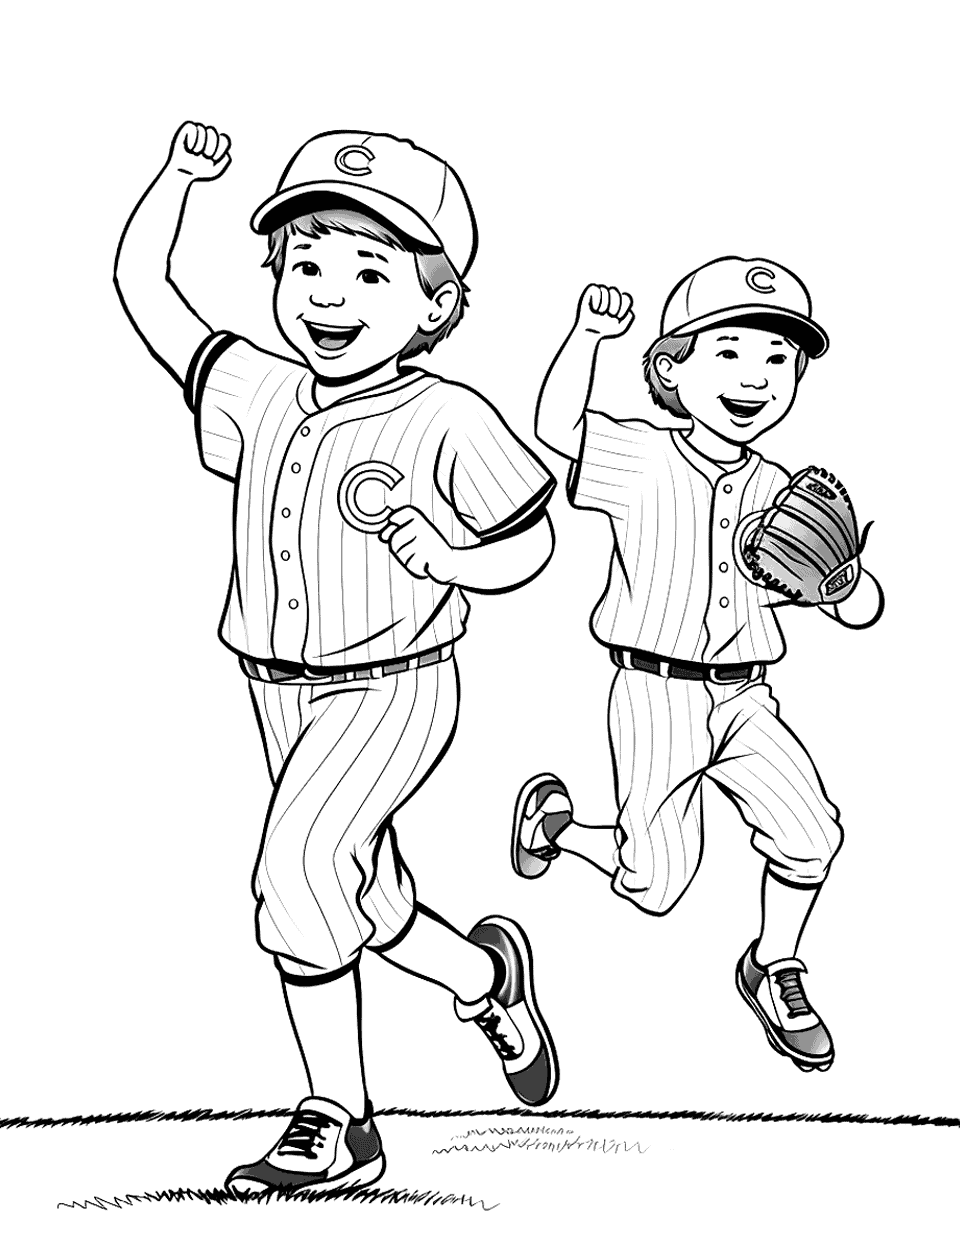 Players Celebrate Baseball Coloring Page - Young baseball players jumping in joy after a game-winning play.